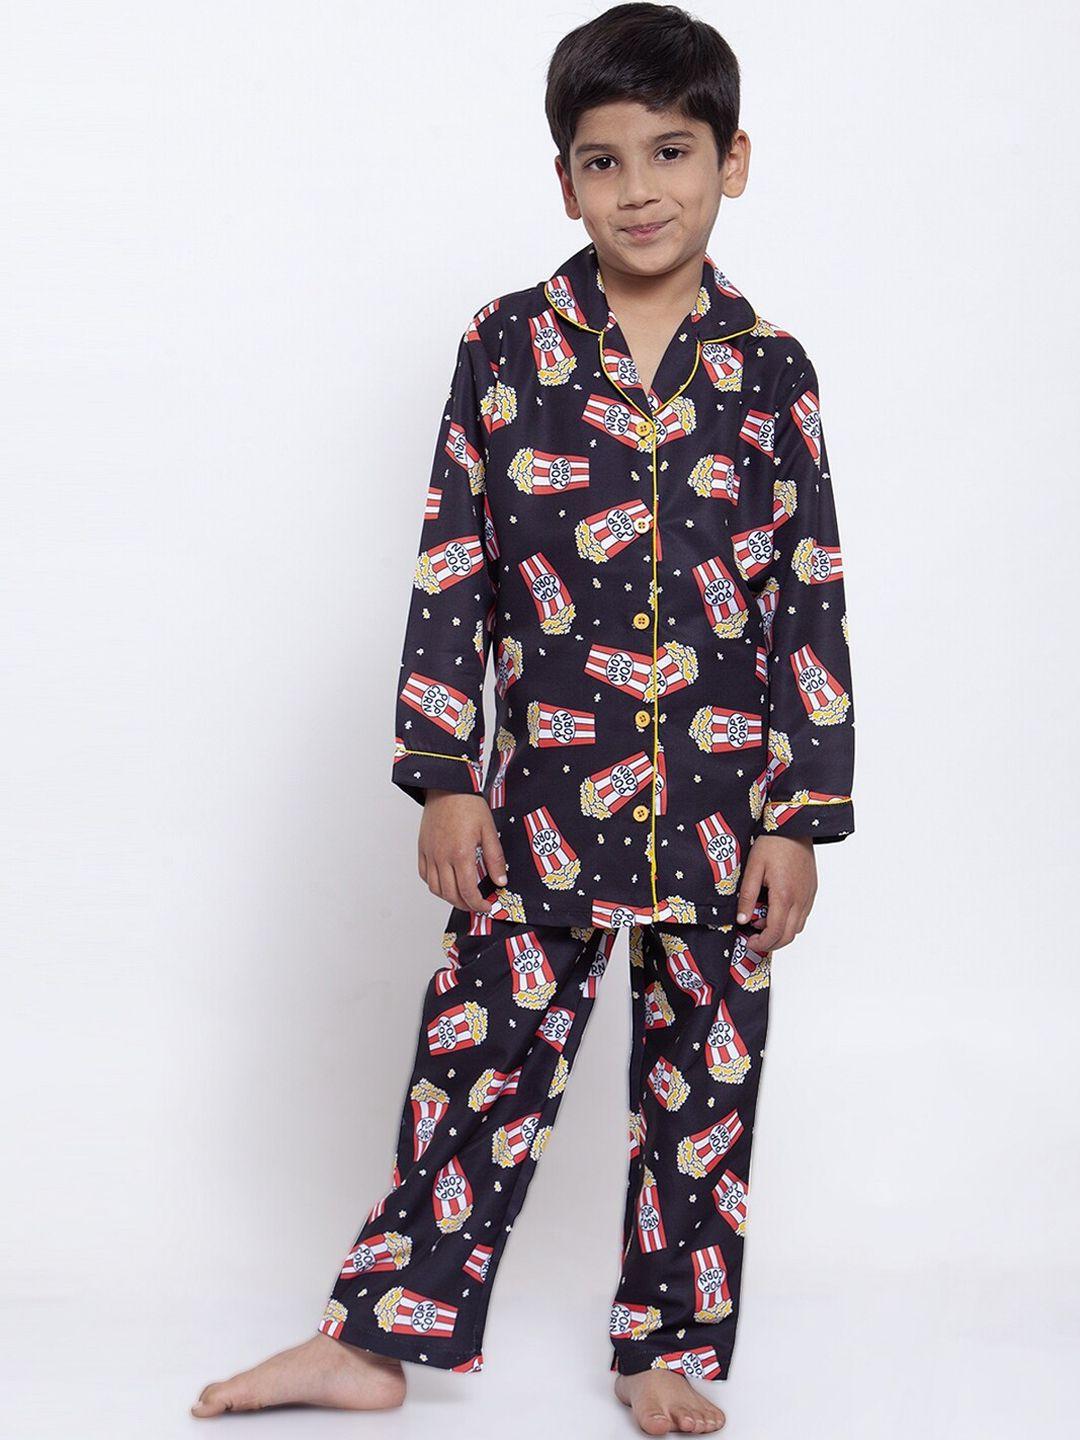 maxence boys black & red printed nigh suit